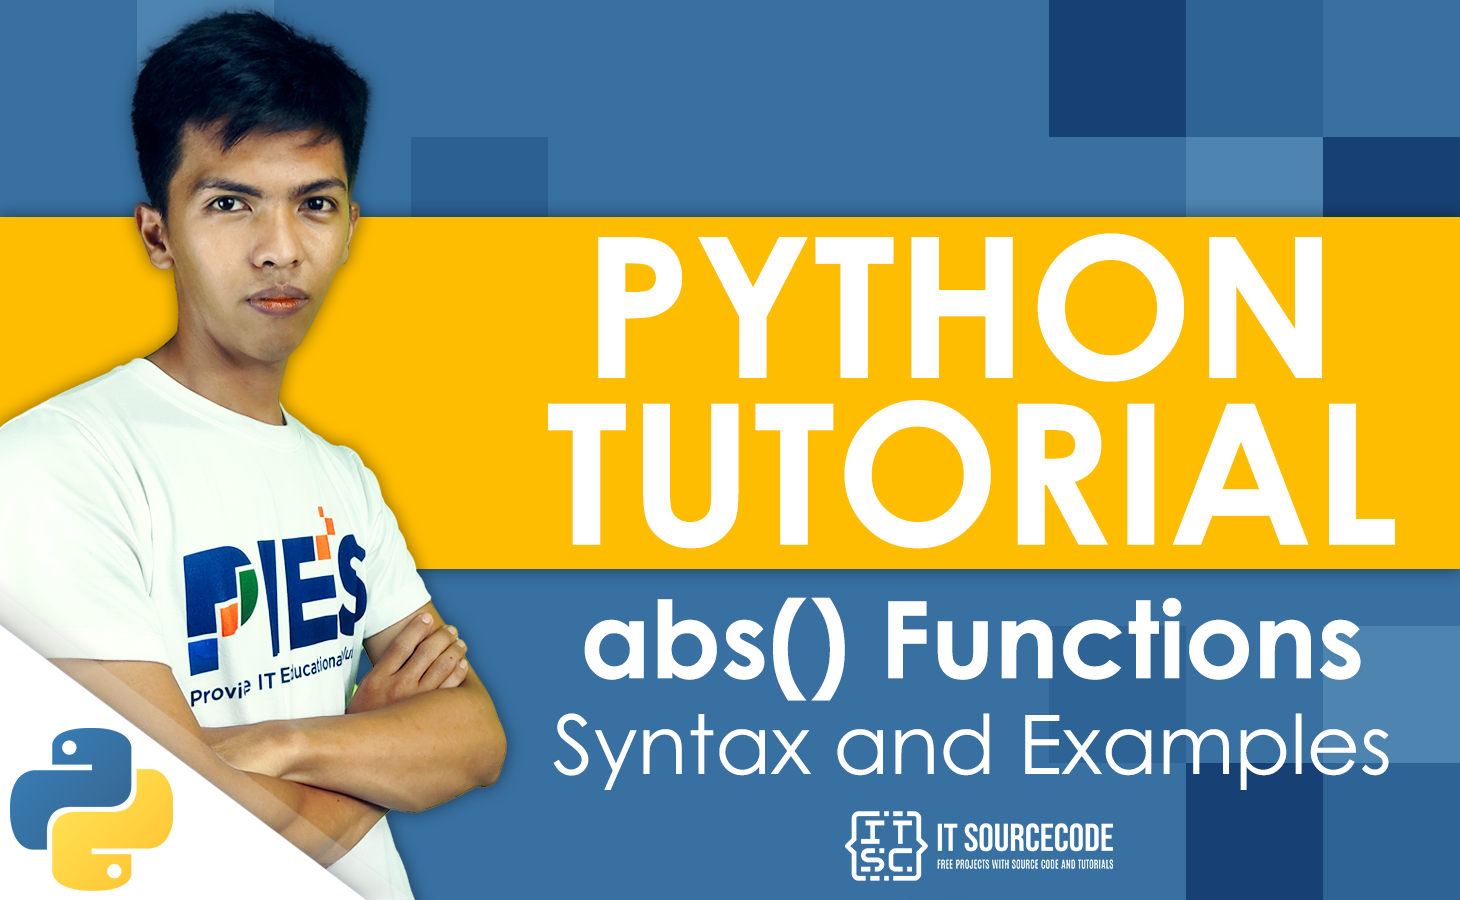 abs() Function in Python (Syntax, Parameters, and Examples)